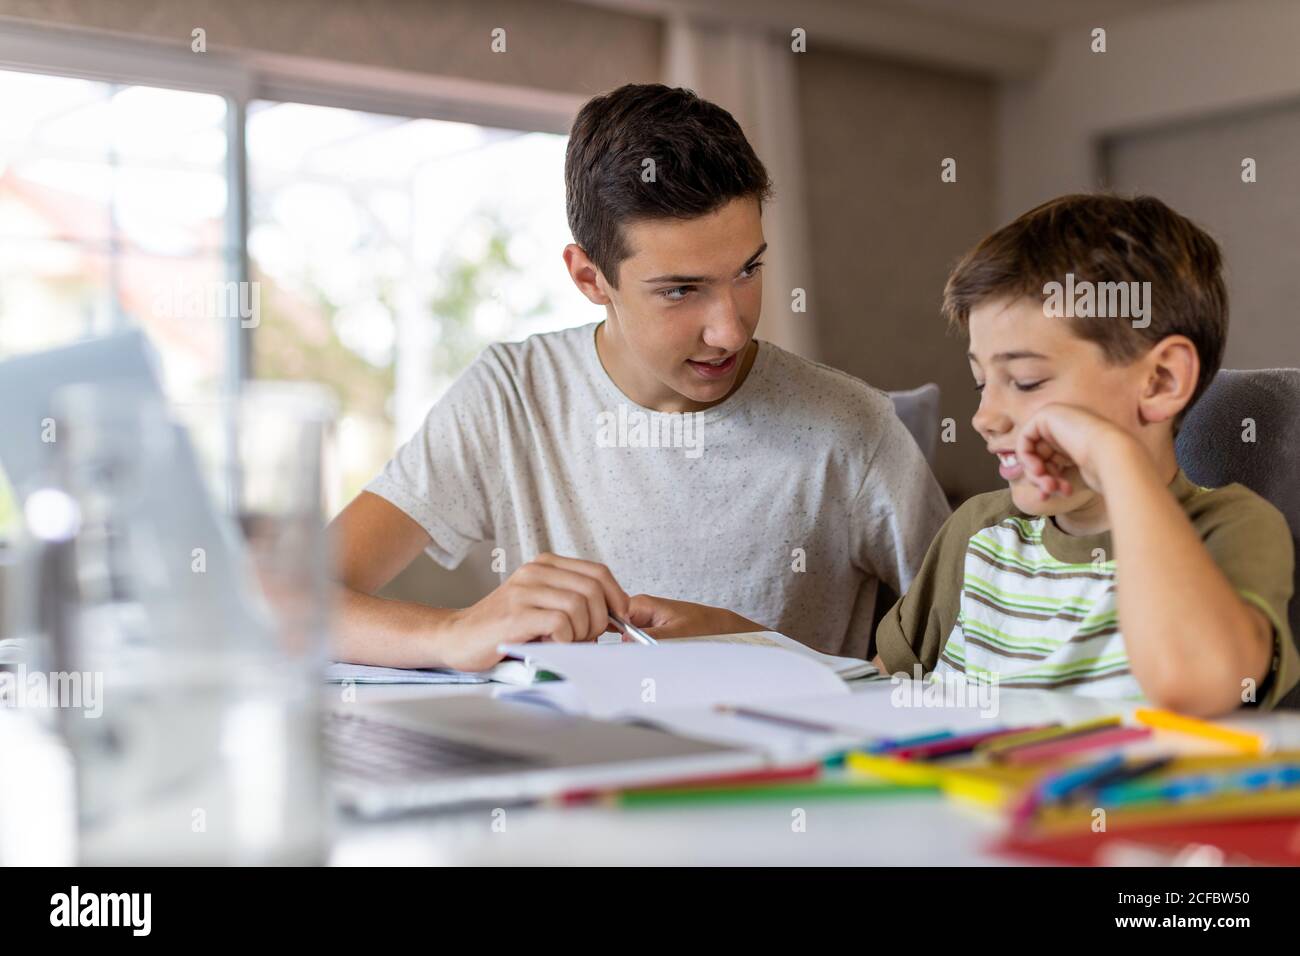 Teenage boy helping his younger brother doing homework at home Stock Photo